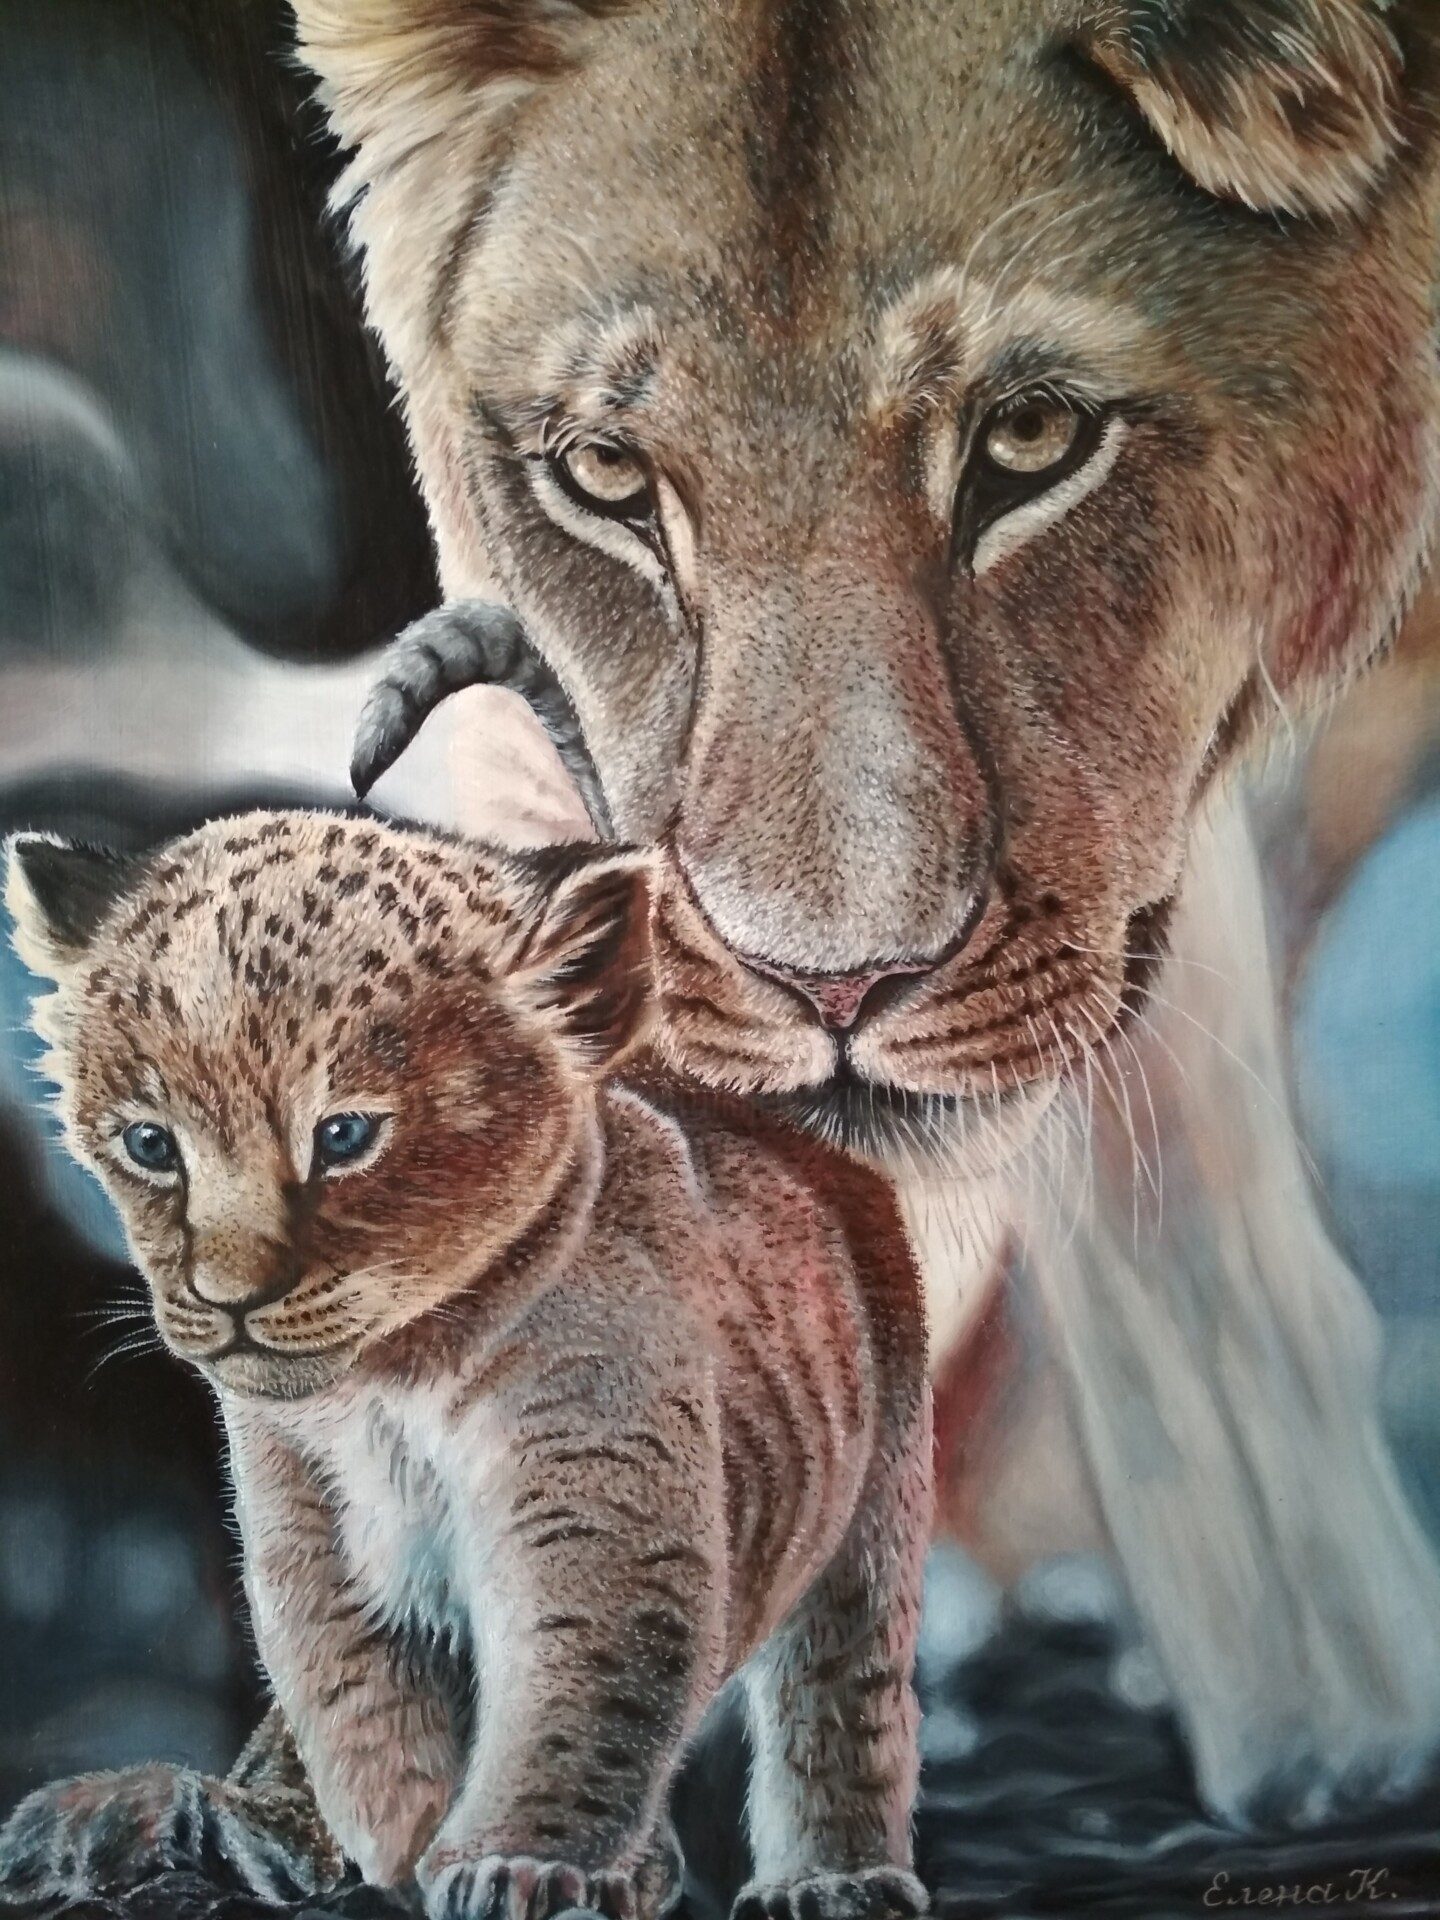 lioness and cubs drawing